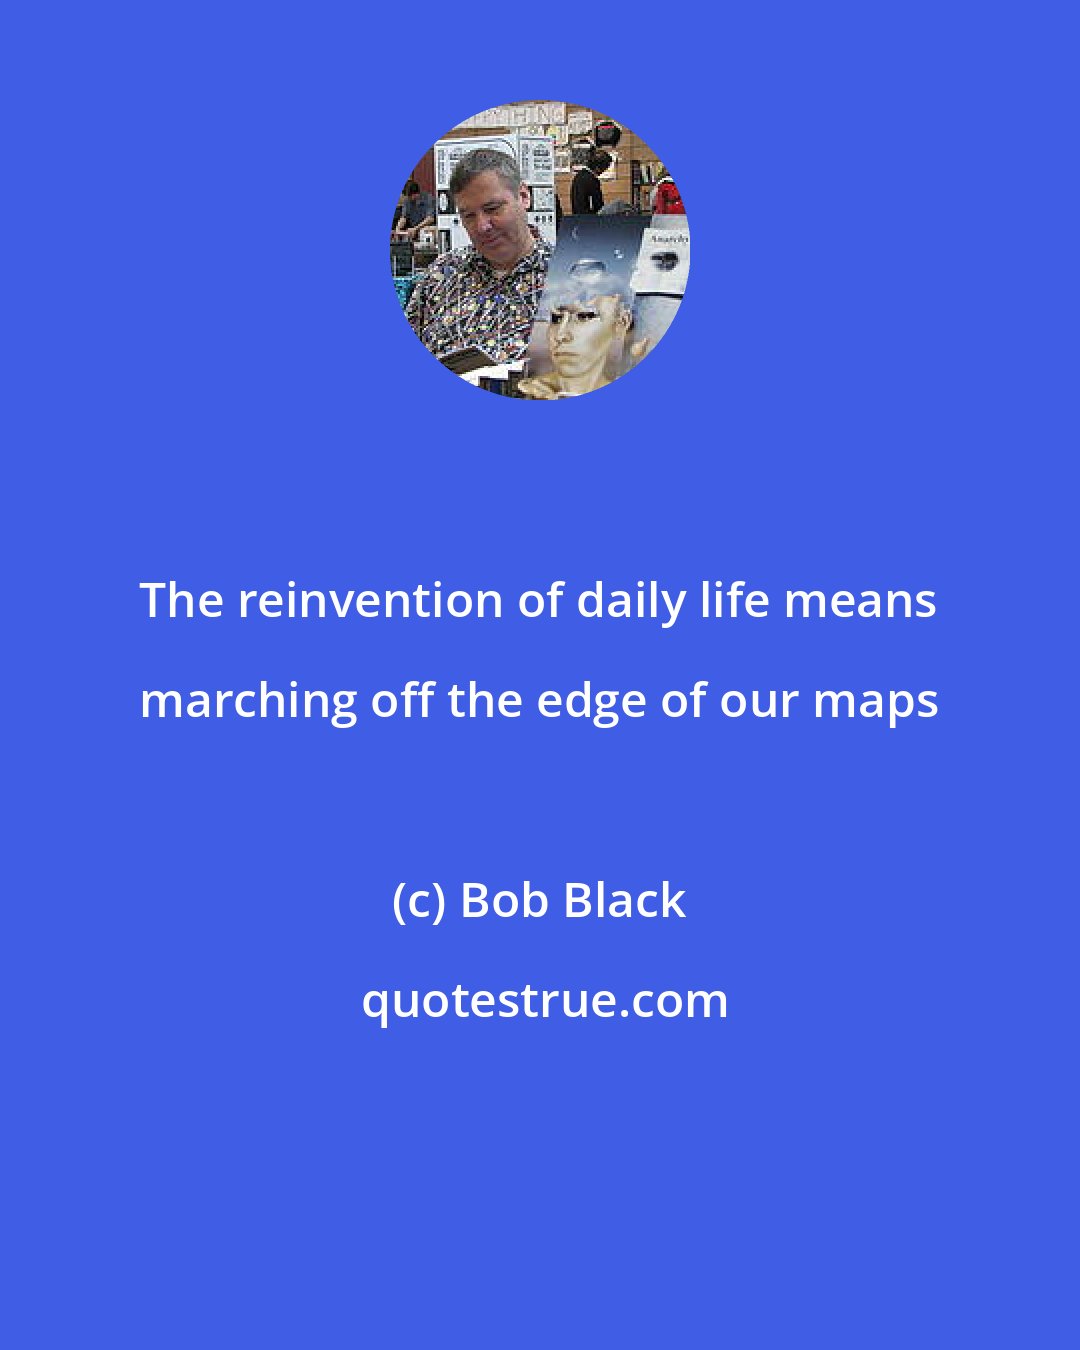 Bob Black: The reinvention of daily life means marching off the edge of our maps